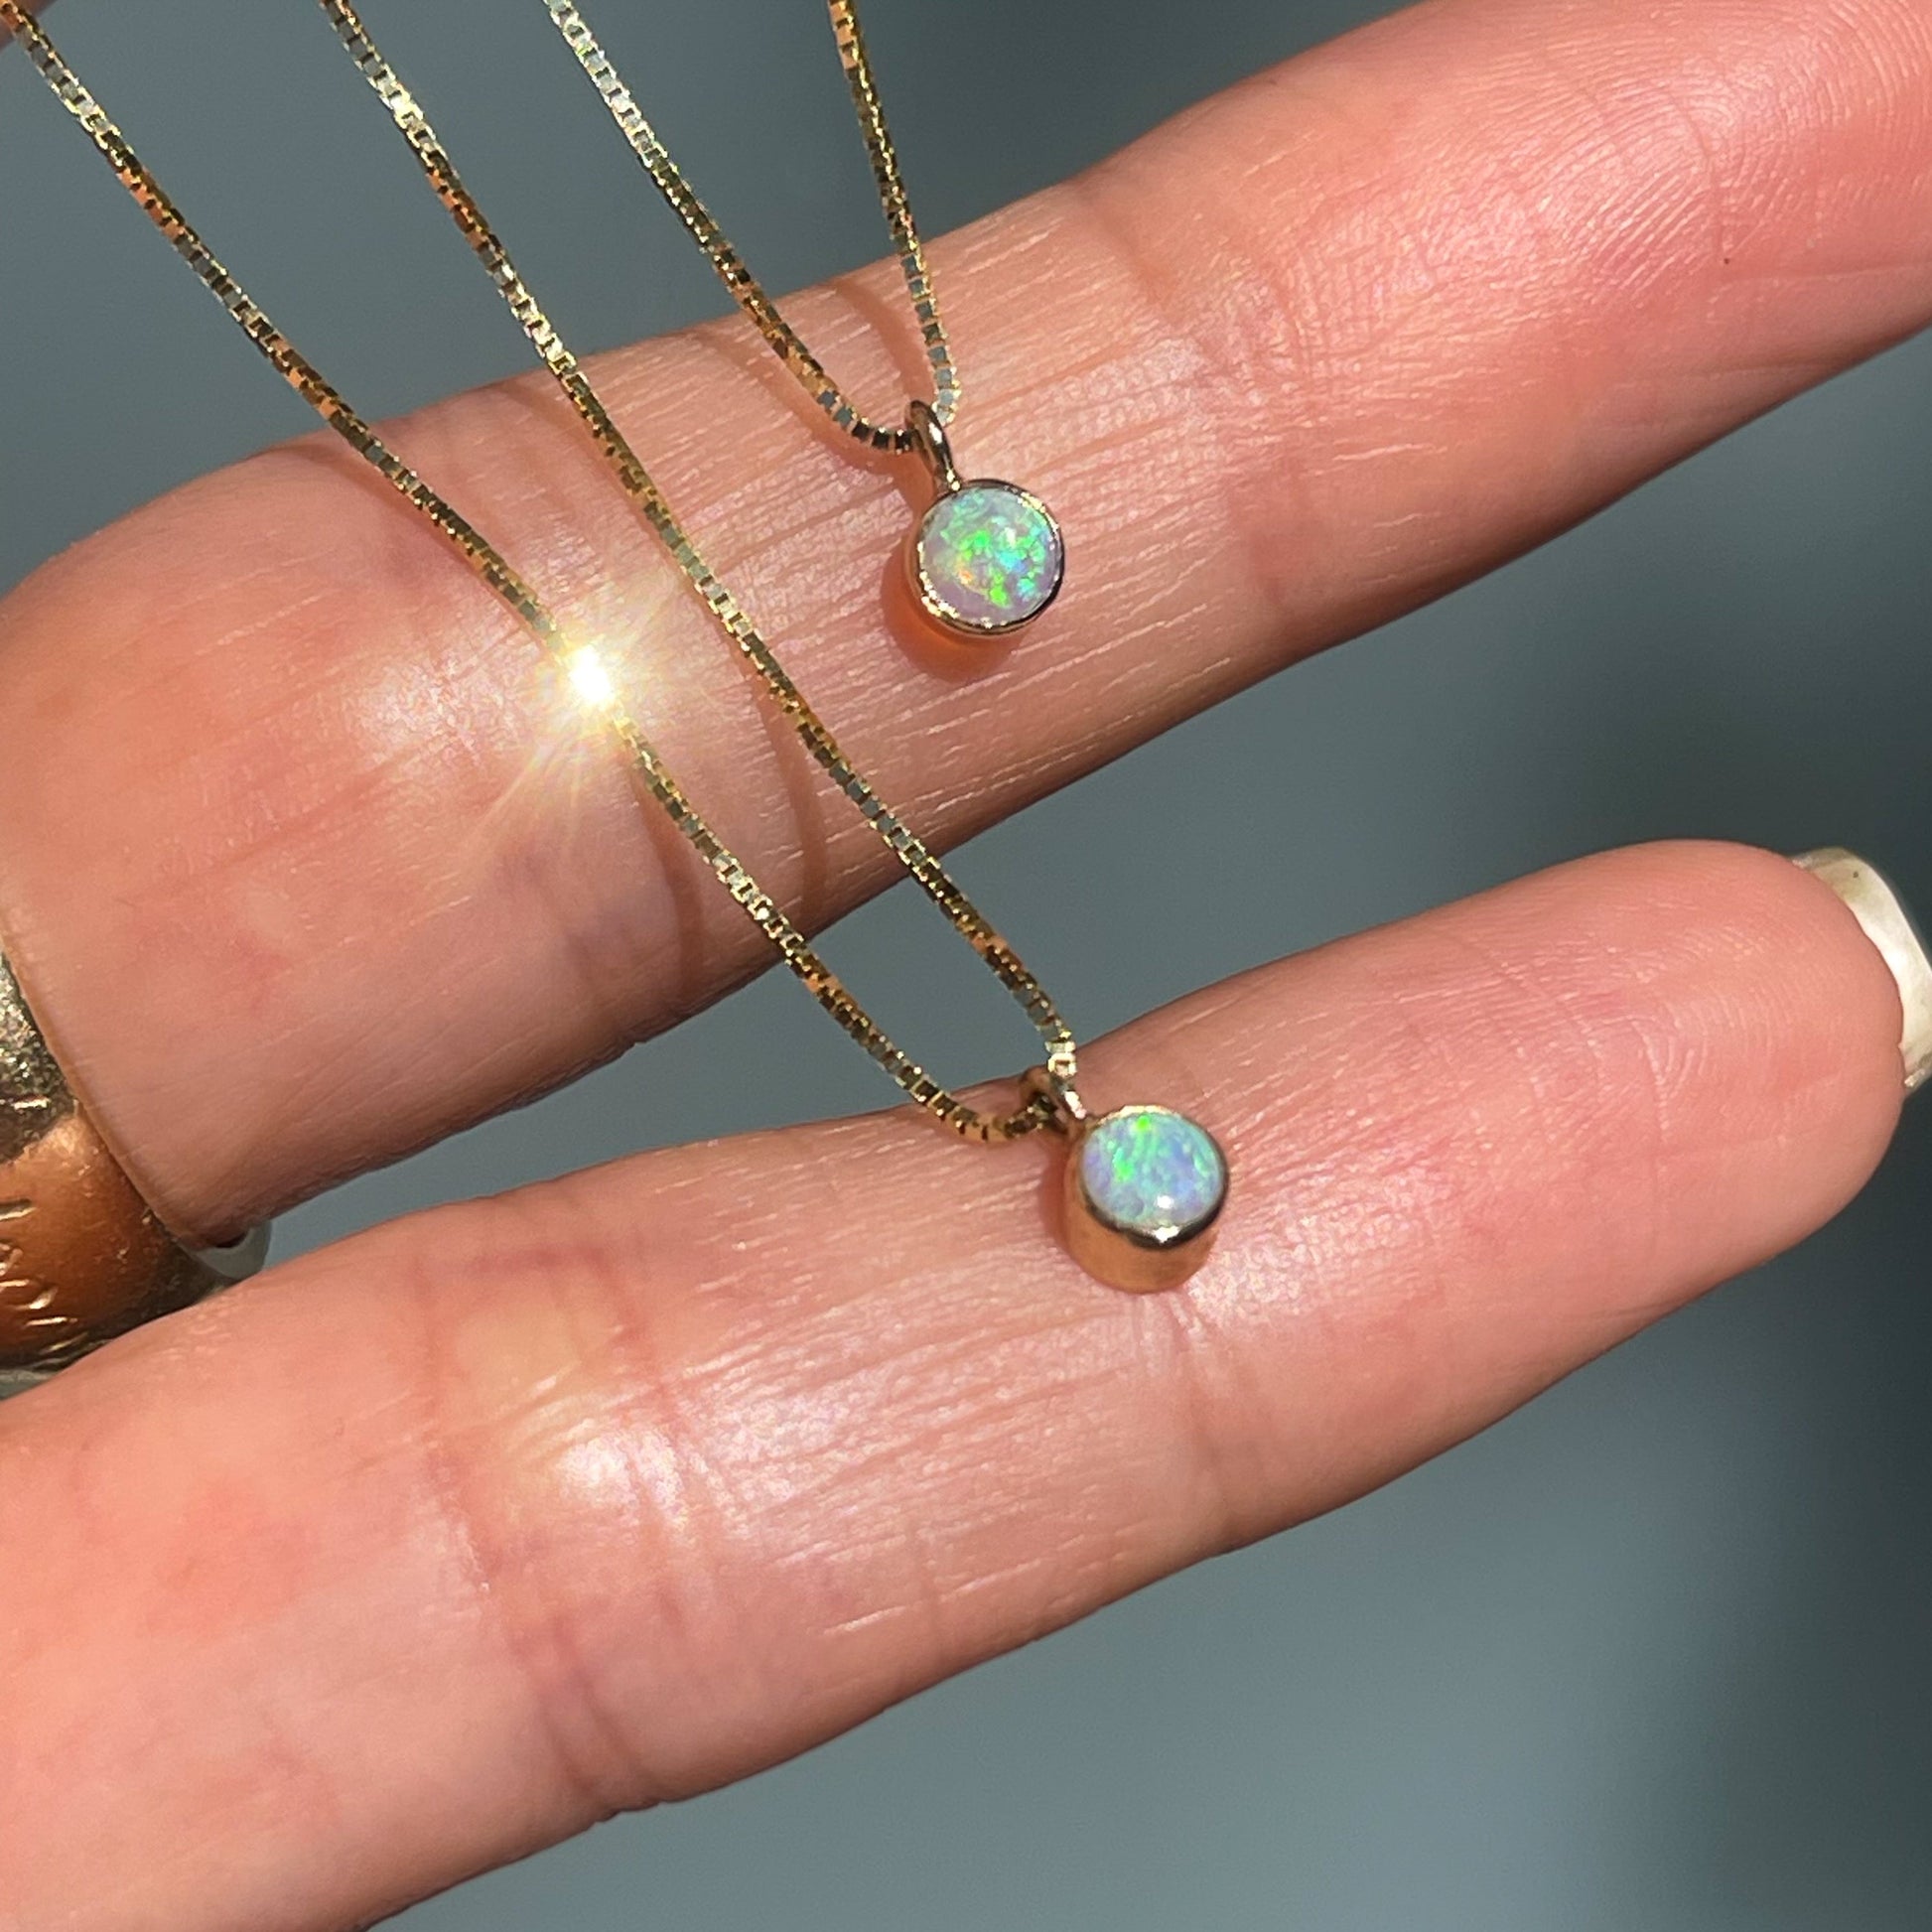 Two Australian Opal Necklaces by NIXIN Jewelry rest atop a hand. The dainty gold chains shine bright and dangle small green opal charms.